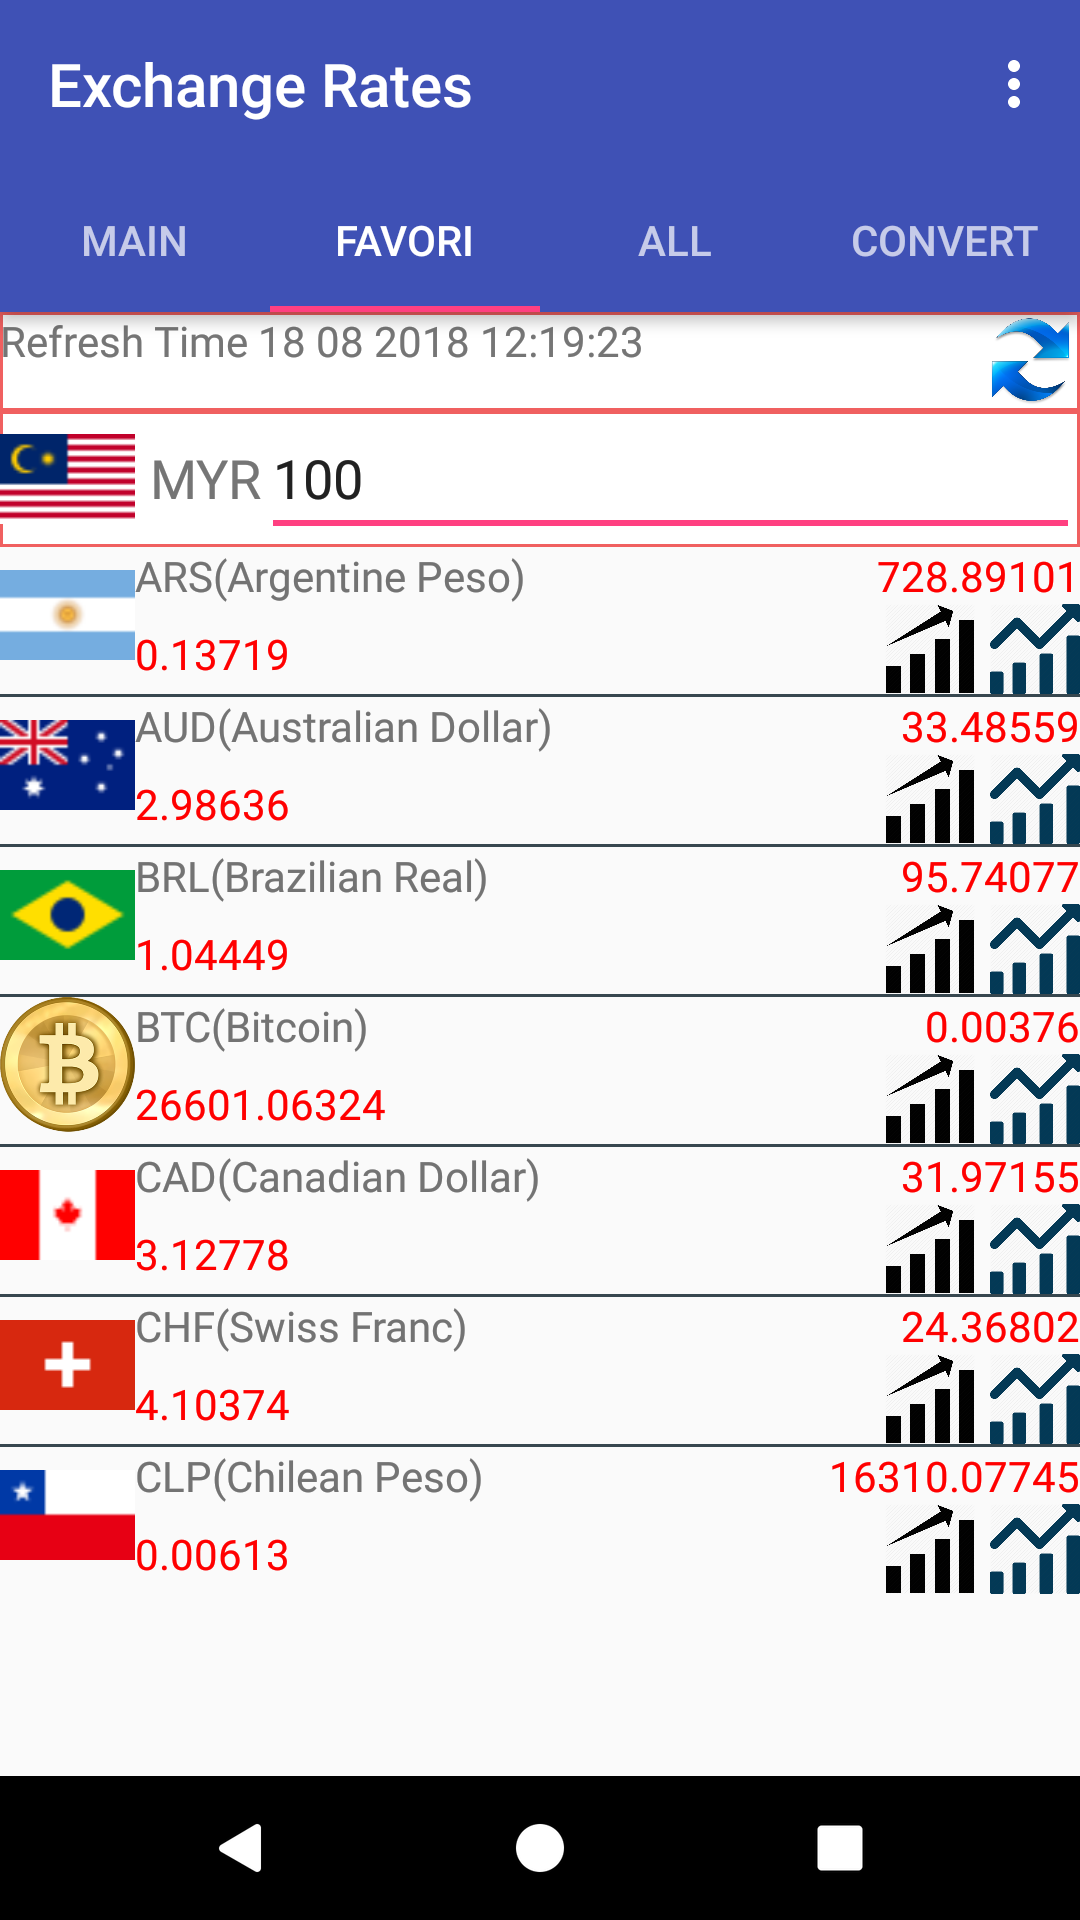 Convert Bitcoins (BTC) and Malaysian Ringgit (MYR): Currency Exchange Rate Conversion Calculator